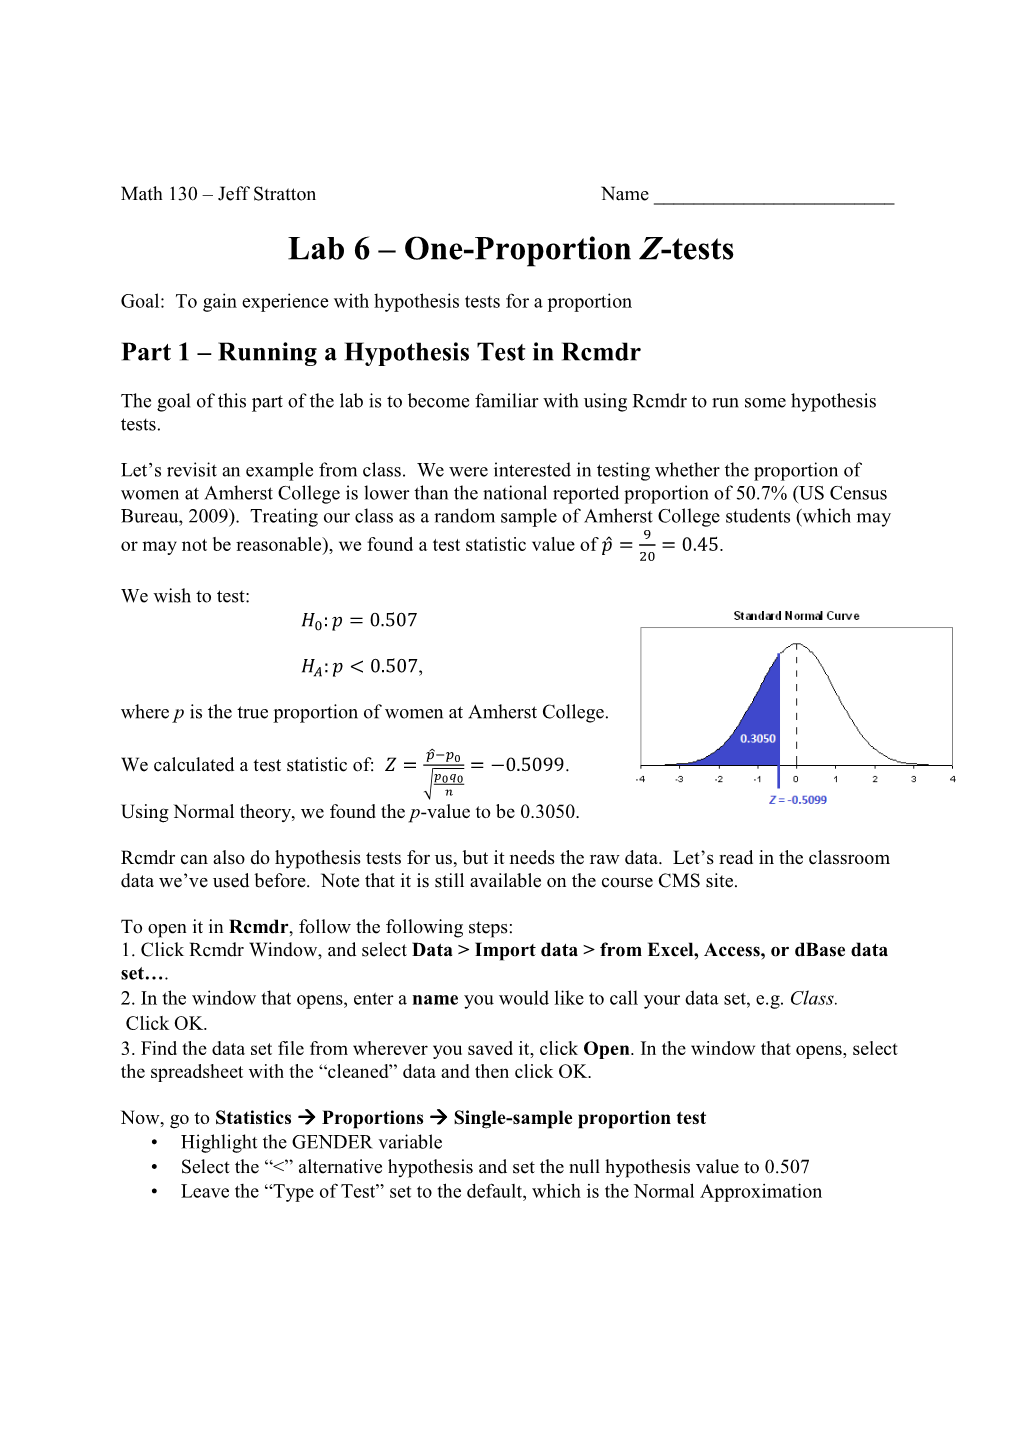 Lab 6 – One-Proportion Z-Tests